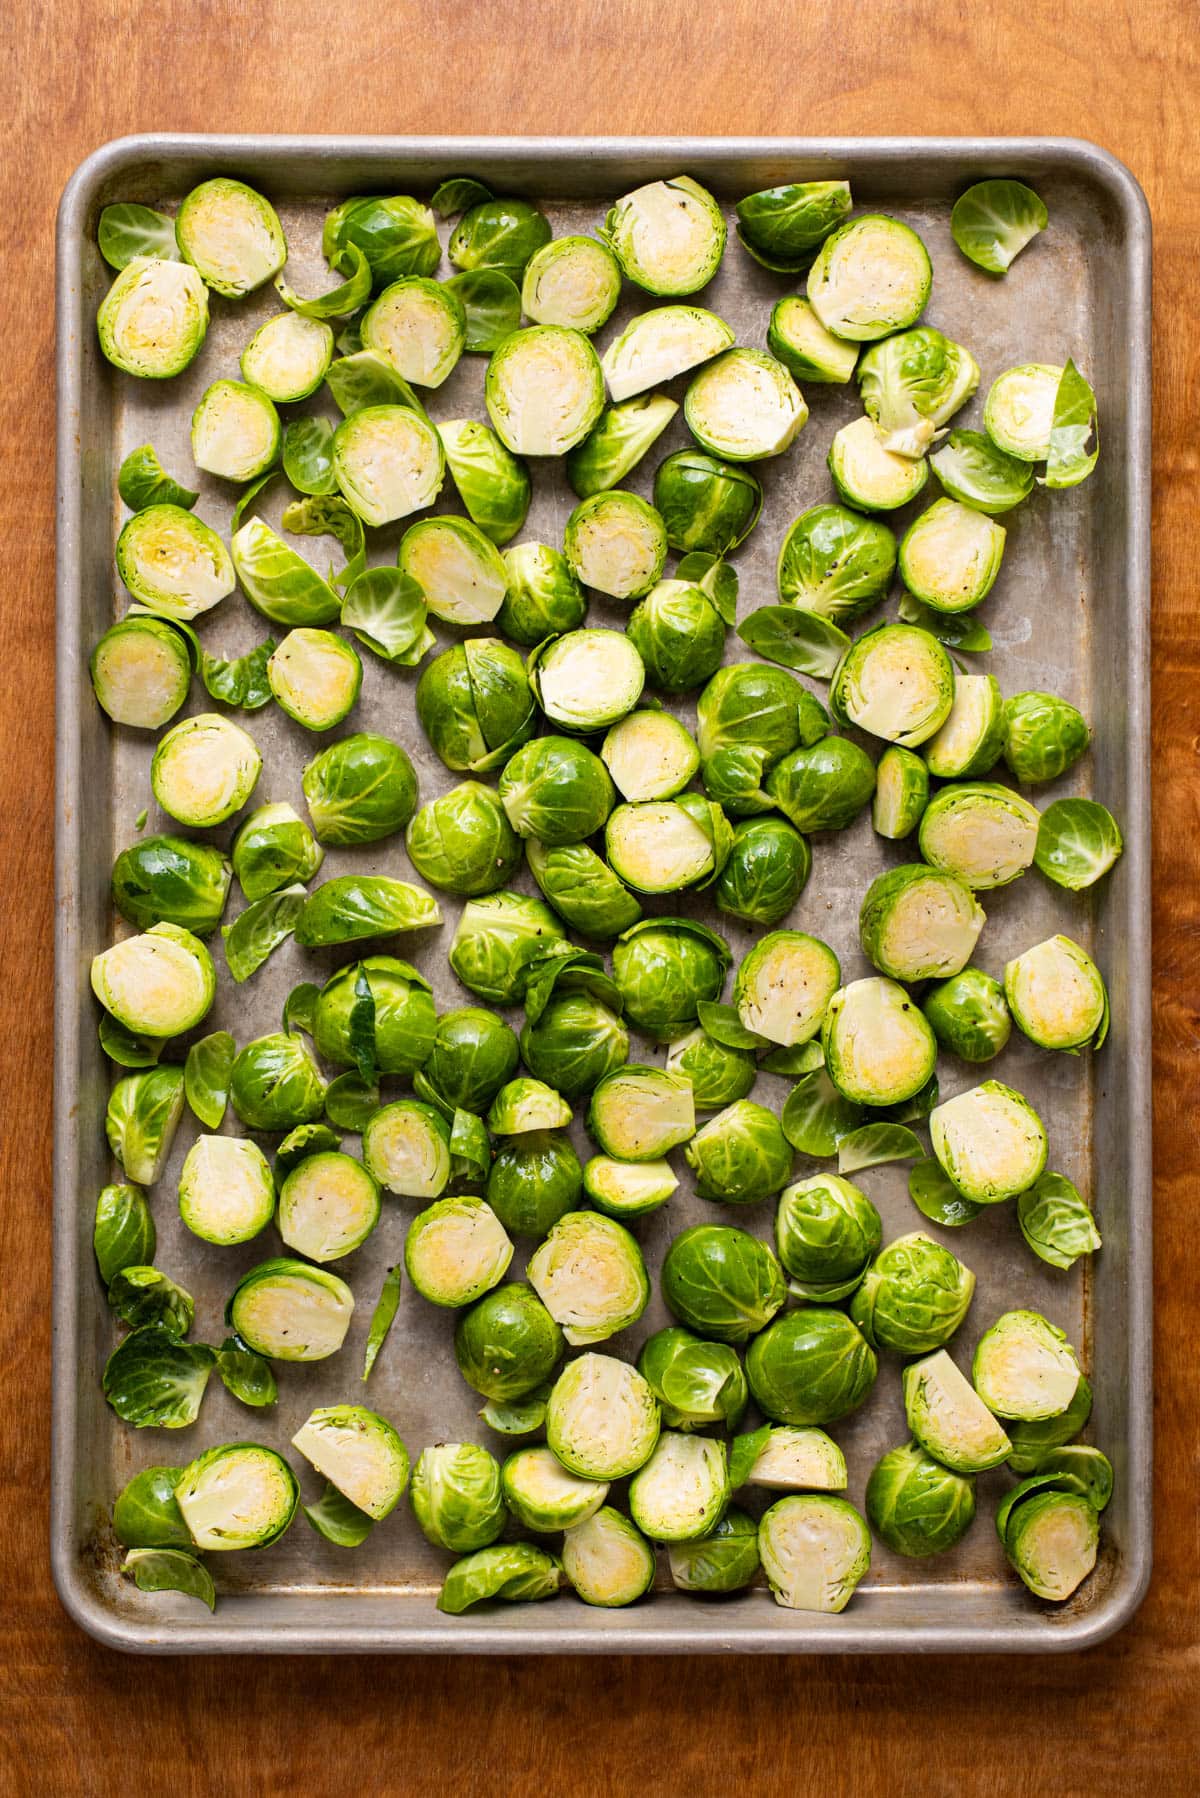 Raw halved Brussels sprouts on a baking sheet.